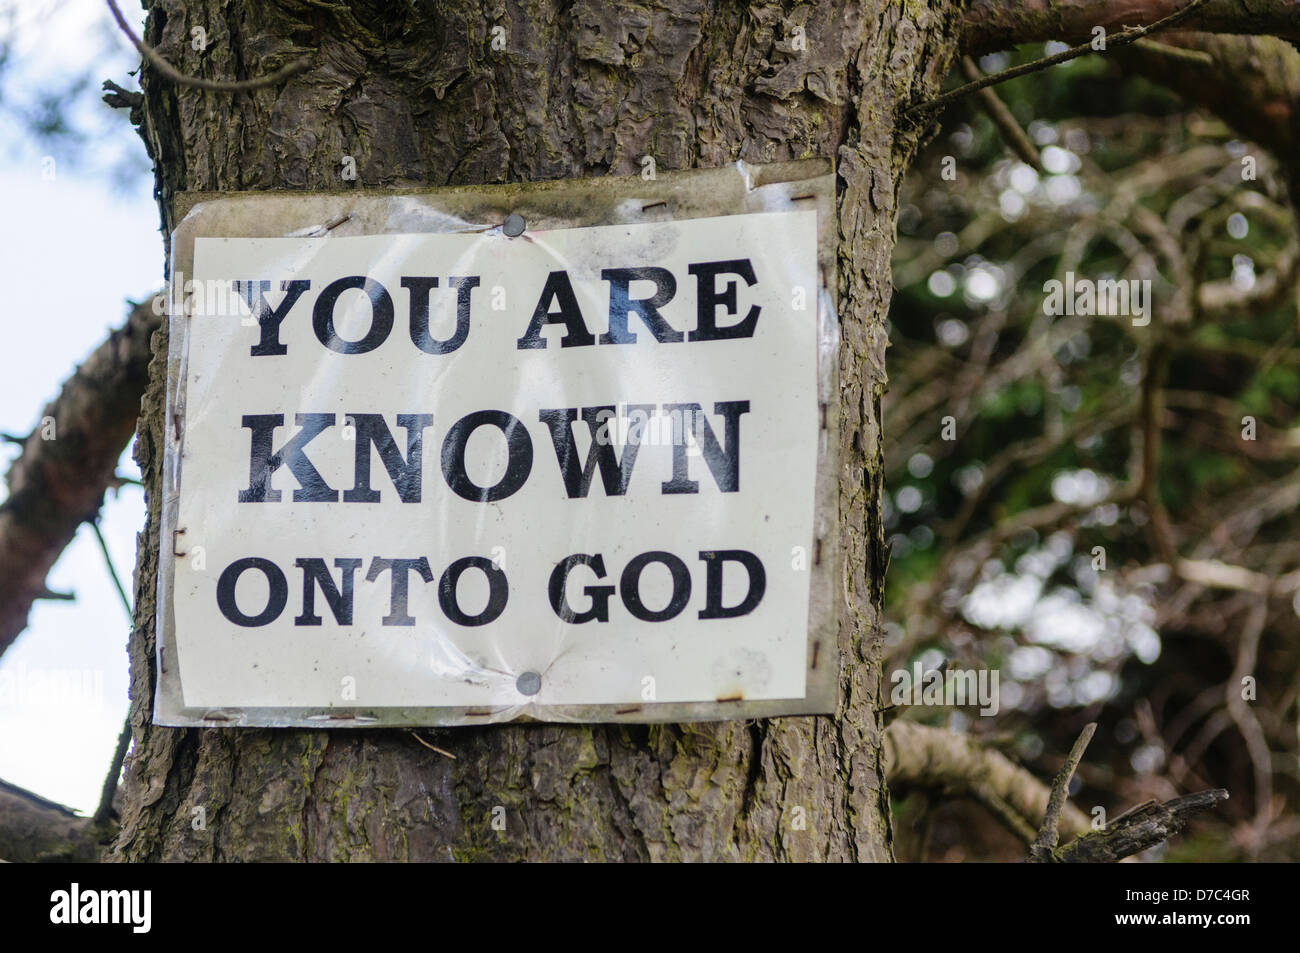 Religious sign typical of many erected in rural Protestant areas of Northern Ireland. 'You are known onto God' Stock Photo